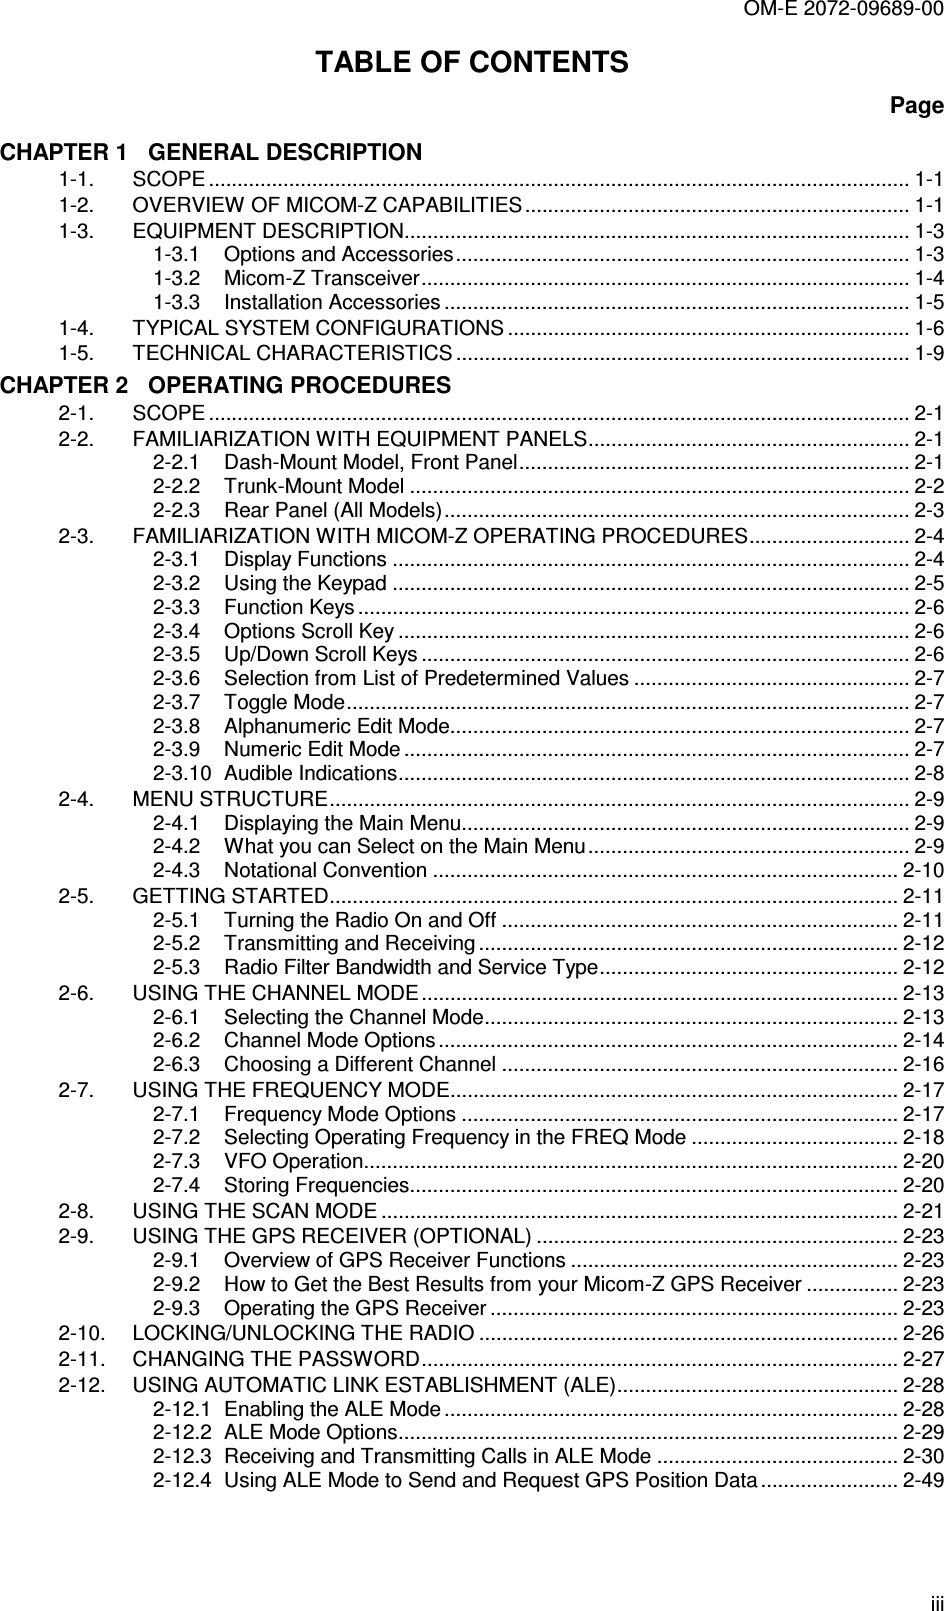 OM-E 2072-09689-00 iii TABLE OF CONTENTS Page CHAPTER 1   GENERAL DESCRIPTION 1-1. SCOPE .......................................................................................................................... 1-1 1-2. OVERVIEW OF MICOM-Z CAPABILITIES................................................................... 1-1 1-3. EQUIPMENT DESCRIPTION........................................................................................ 1-3 1-3.1 Options and Accessories............................................................................... 1-3 1-3.2 Micom-Z Transceiver..................................................................................... 1-4 1-3.3 Installation Accessories ................................................................................. 1-5 1-4. TYPICAL SYSTEM CONFIGURATIONS ...................................................................... 1-6 1-5. TECHNICAL CHARACTERISTICS ............................................................................... 1-9 CHAPTER 2   OPERATING PROCEDURES 2-1. SCOPE .......................................................................................................................... 2-1 2-2. FAMILIARIZATION WITH EQUIPMENT PANELS........................................................ 2-1 2-2.1 Dash-Mount Model, Front Panel.................................................................... 2-1 2-2.2 Trunk-Mount Model ....................................................................................... 2-2 2-2.3 Rear Panel (All Models)................................................................................. 2-3 2-3. FAMILIARIZATION WITH MICOM-Z OPERATING PROCEDURES............................ 2-4 2-3.1 Display Functions .......................................................................................... 2-4 2-3.2 Using the Keypad .......................................................................................... 2-5 2-3.3 Function Keys ................................................................................................ 2-6 2-3.4 Options Scroll Key ......................................................................................... 2-6 2-3.5 Up/Down Scroll Keys ..................................................................................... 2-6 2-3.6 Selection from List of Predetermined Values ................................................ 2-7 2-3.7 Toggle Mode.................................................................................................. 2-7 2-3.8 Alphanumeric Edit Mode................................................................................ 2-7 2-3.9 Numeric Edit Mode ........................................................................................ 2-7 2-3.10 Audible Indications......................................................................................... 2-8 2-4. MENU STRUCTURE..................................................................................................... 2-9 2-4.1 Displaying the Main Menu.............................................................................. 2-9 2-4.2 What you can Select on the Main Menu........................................................ 2-9 2-4.3 Notational Convention ................................................................................. 2-10 2-5. GETTING STARTED................................................................................................... 2-11 2-5.1 Turning the Radio On and Off ..................................................................... 2-11 2-5.2 Transmitting and Receiving......................................................................... 2-12 2-5.3 Radio Filter Bandwidth and Service Type.................................................... 2-12 2-6. USING THE CHANNEL MODE ................................................................................... 2-13 2-6.1 Selecting the Channel Mode........................................................................ 2-13 2-6.2 Channel Mode Options ................................................................................ 2-14 2-6.3 Choosing a Different Channel ..................................................................... 2-16 2-7. USING THE FREQUENCY MODE.............................................................................. 2-17 2-7.1 Frequency Mode Options ............................................................................ 2-17 2-7.2 Selecting Operating Frequency in the FREQ Mode .................................... 2-18 2-7.3 VFO Operation............................................................................................. 2-20 2-7.4 Storing Frequencies..................................................................................... 2-20 2-8. USING THE SCAN MODE .......................................................................................... 2-21 2-9. USING THE GPS RECEIVER (OPTIONAL) ............................................................... 2-23 2-9.1 Overview of GPS Receiver Functions ......................................................... 2-23 2-9.2 How to Get the Best Results from your Micom-Z GPS Receiver ................ 2-23 2-9.3 Operating the GPS Receiver ....................................................................... 2-23 2-10. LOCKING/UNLOCKING THE RADIO ......................................................................... 2-26 2-11. CHANGING THE PASSWORD................................................................................... 2-27 2-12. USING AUTOMATIC LINK ESTABLISHMENT (ALE)................................................. 2-28 2-12.1 Enabling the ALE Mode ............................................................................... 2-28 2-12.2 ALE Mode Options....................................................................................... 2-29 2-12.3 Receiving and Transmitting Calls in ALE Mode .......................................... 2-30 2-12.4 Using ALE Mode to Send and Request GPS Position Data........................ 2-49 